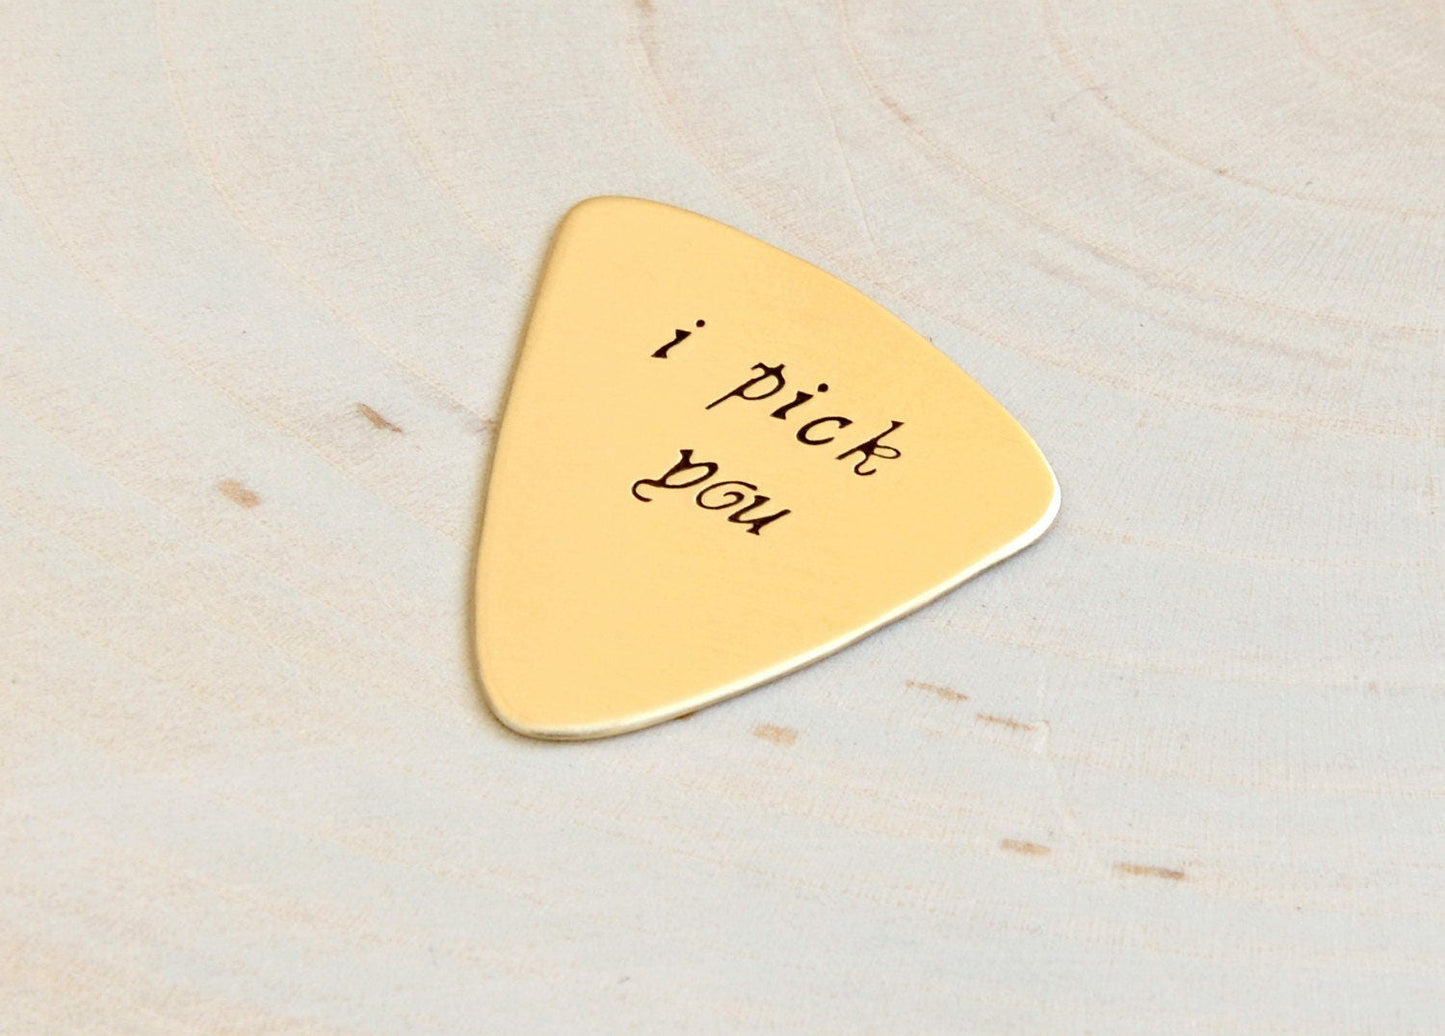 Triangular Bass Style Guitar Pick with classic I pick you